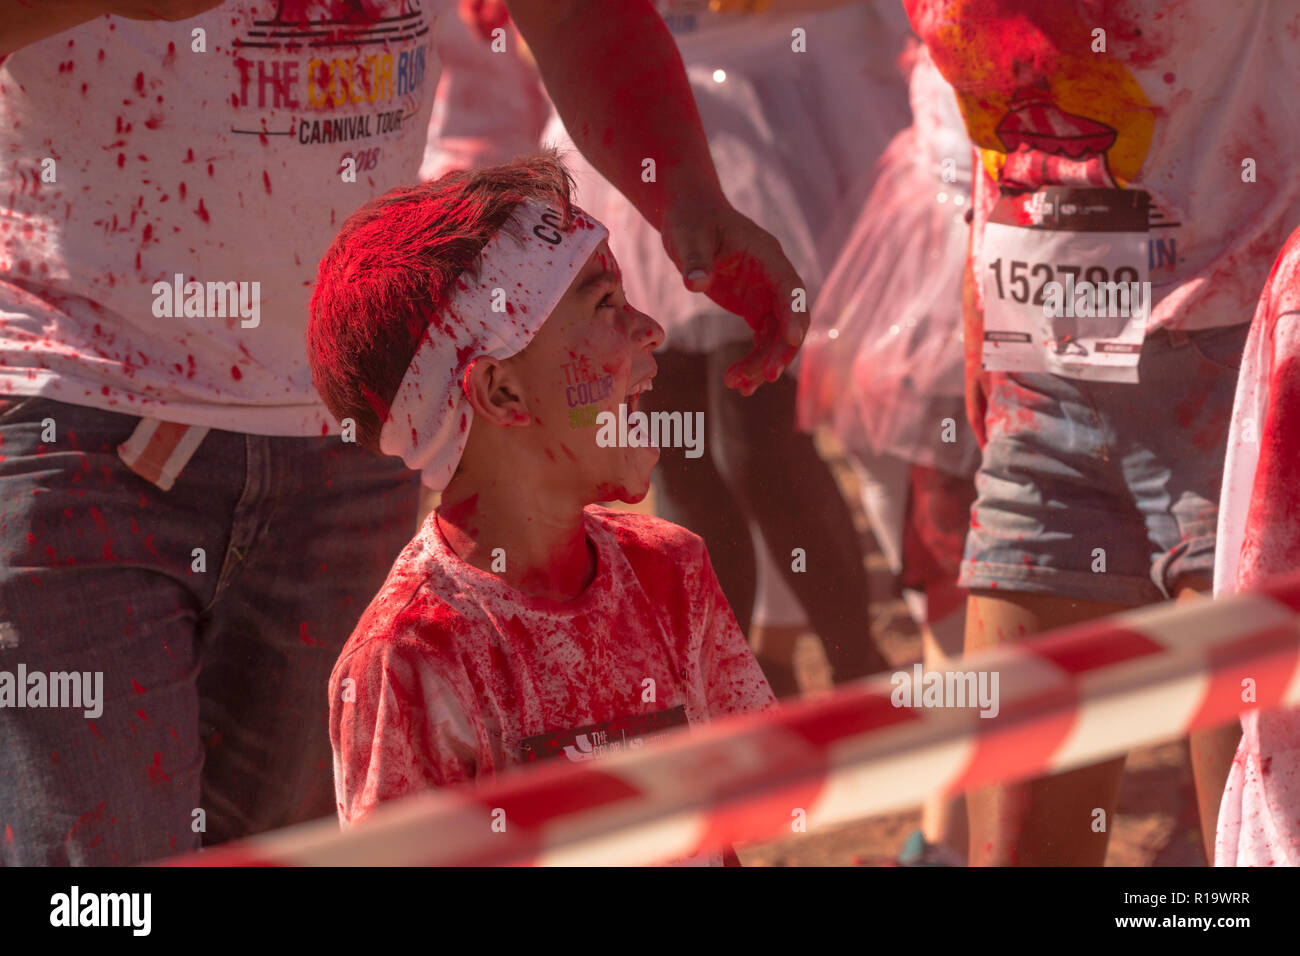 caucasian little boy about 5-7 years old laughing and full of joy covered in red powder paint and wearing a white headband surrounded by people at a Summer fun run event Stock Photo